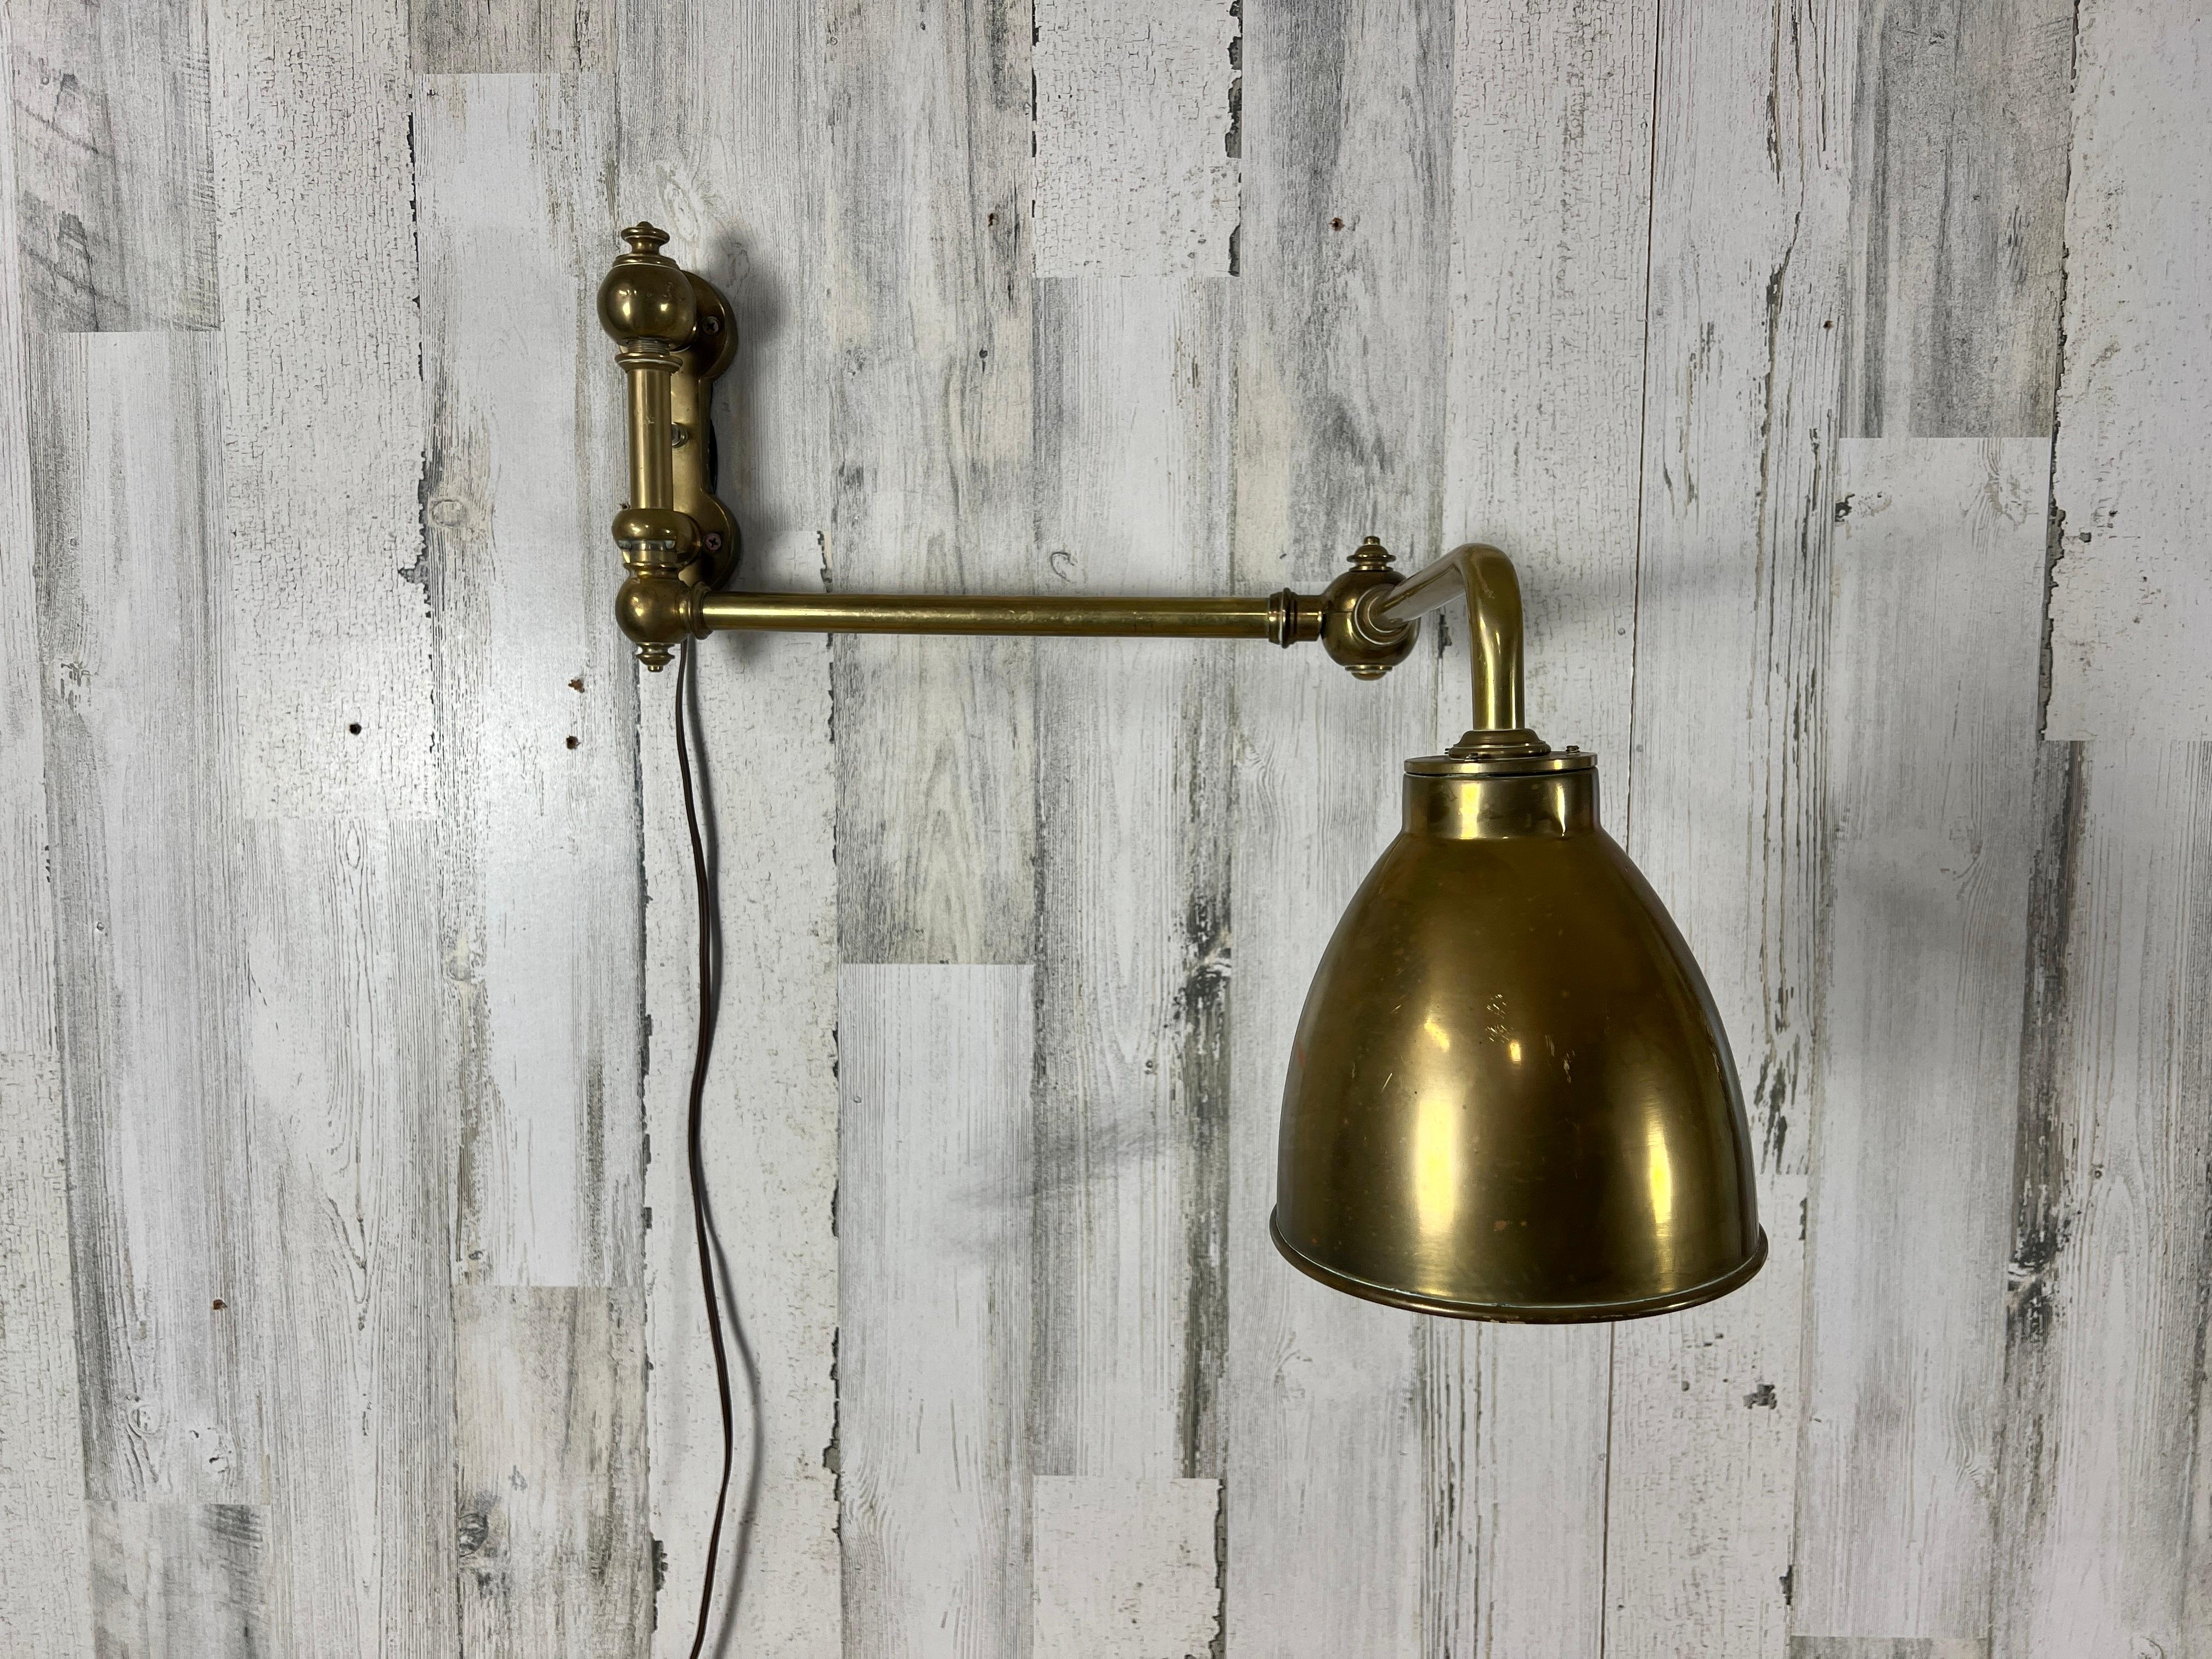 Antique style solid Brass adjustable wall sconce with cone shaped shade.